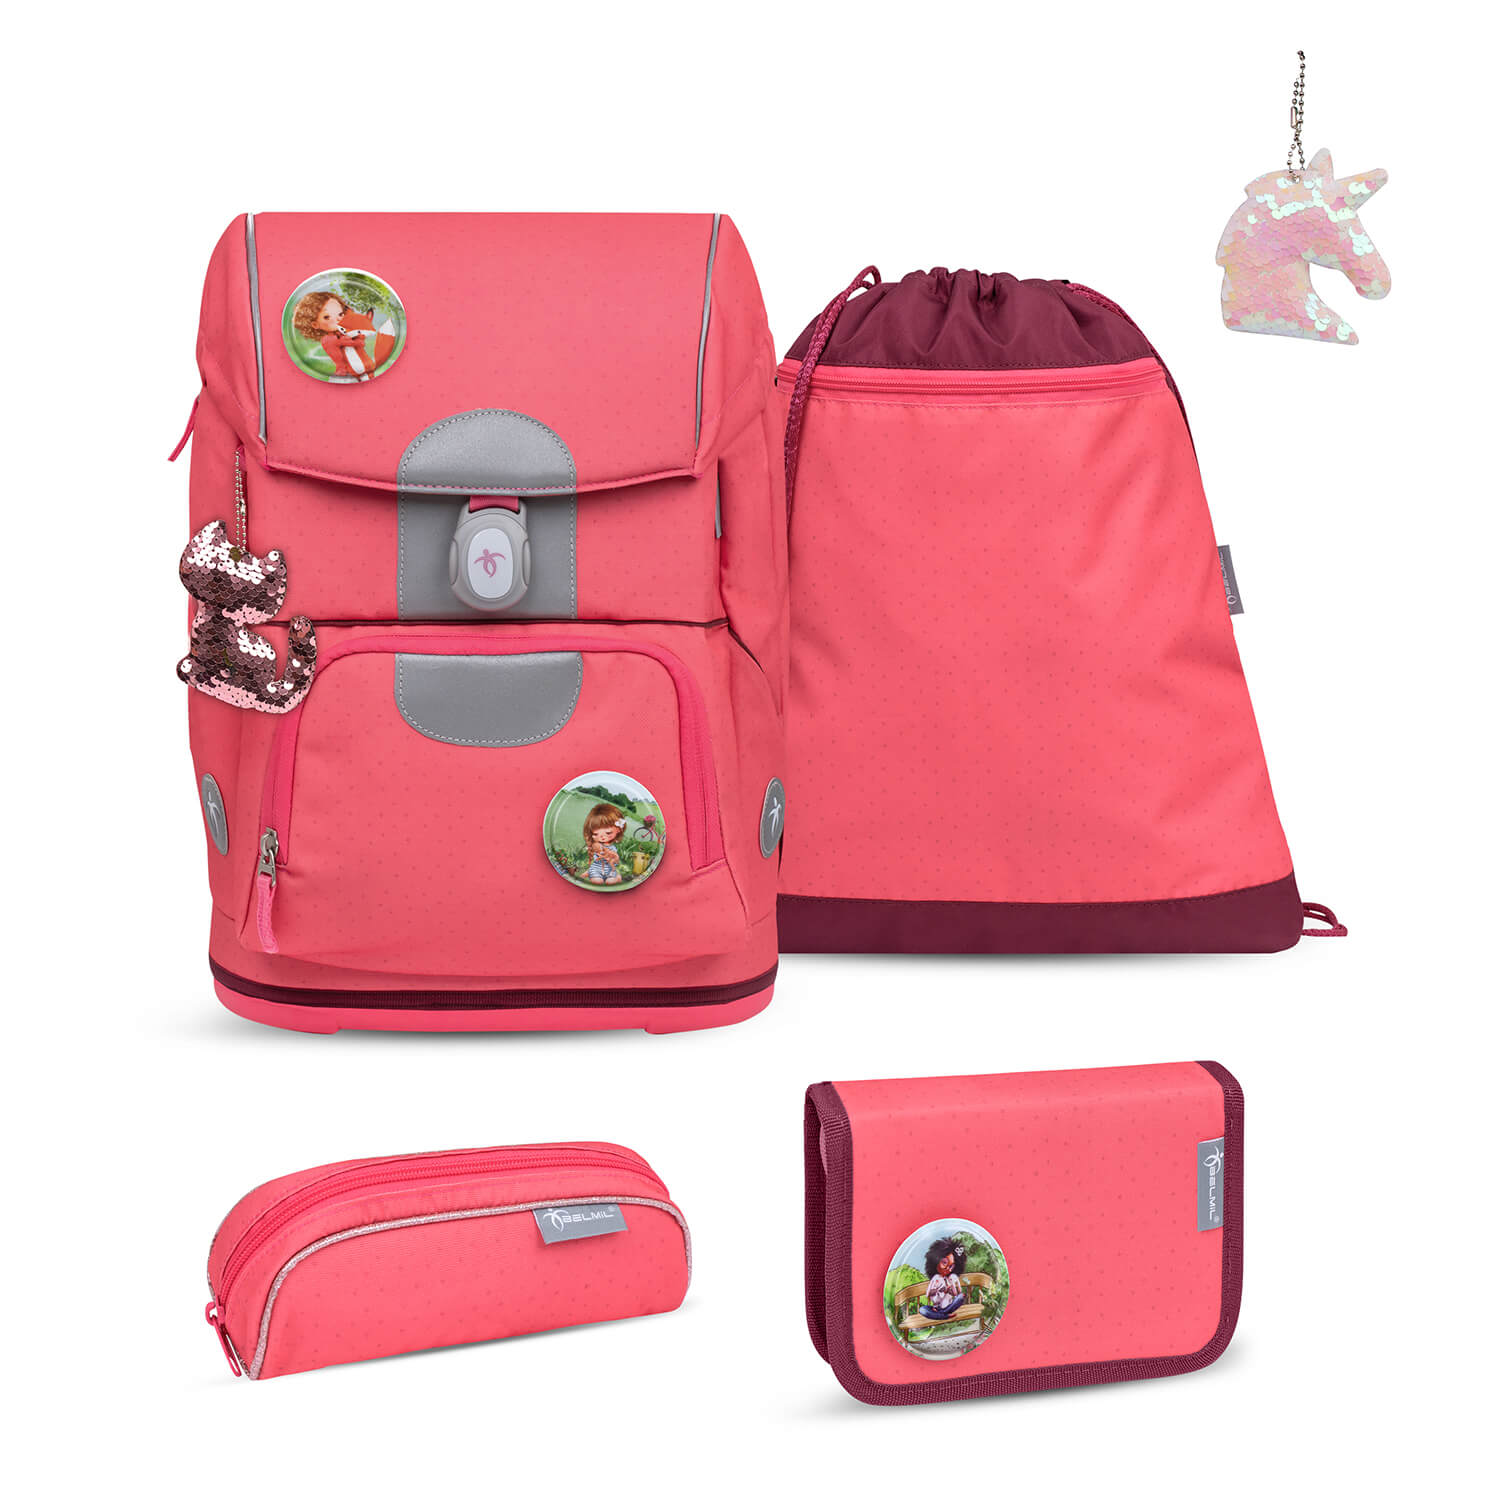 Motion Sweet Candy schoolbag set 6 pcs with GRATIS keychain